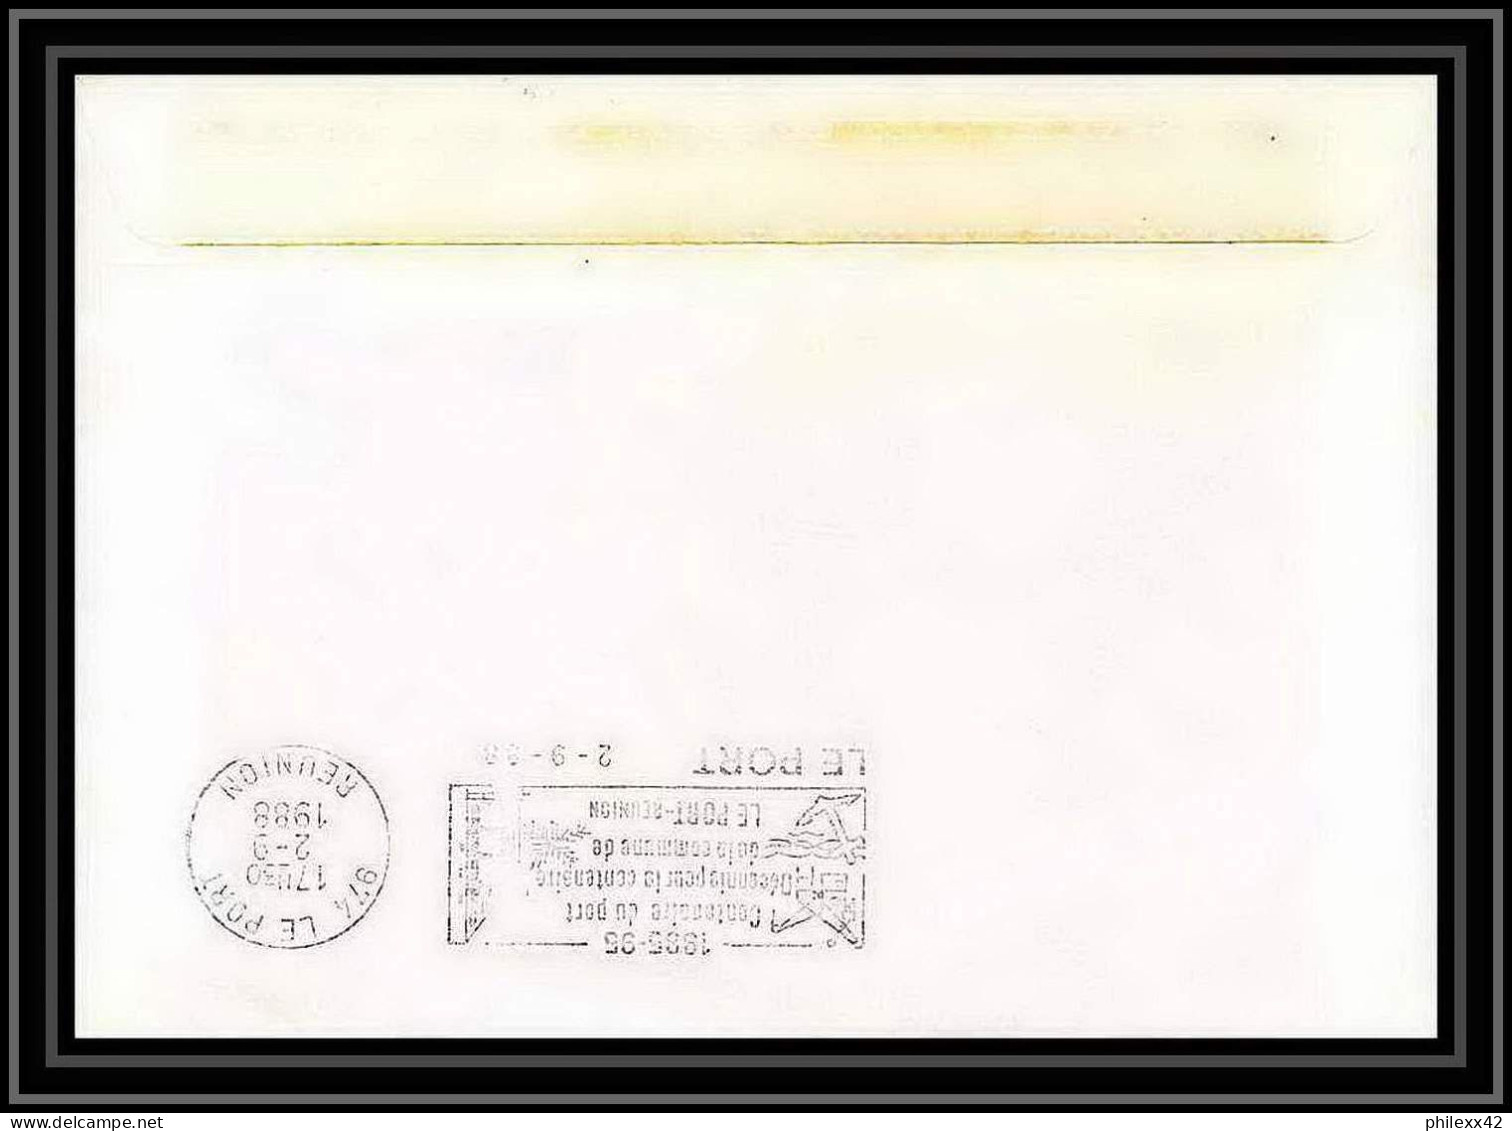 1567 TAAF Terres Australes Lettre (cover) Md 59 Fournaise La Reunion Signé Signed Marion Dufresne 2/9/1988 Obl Paquebot  - Antarctische Expedities